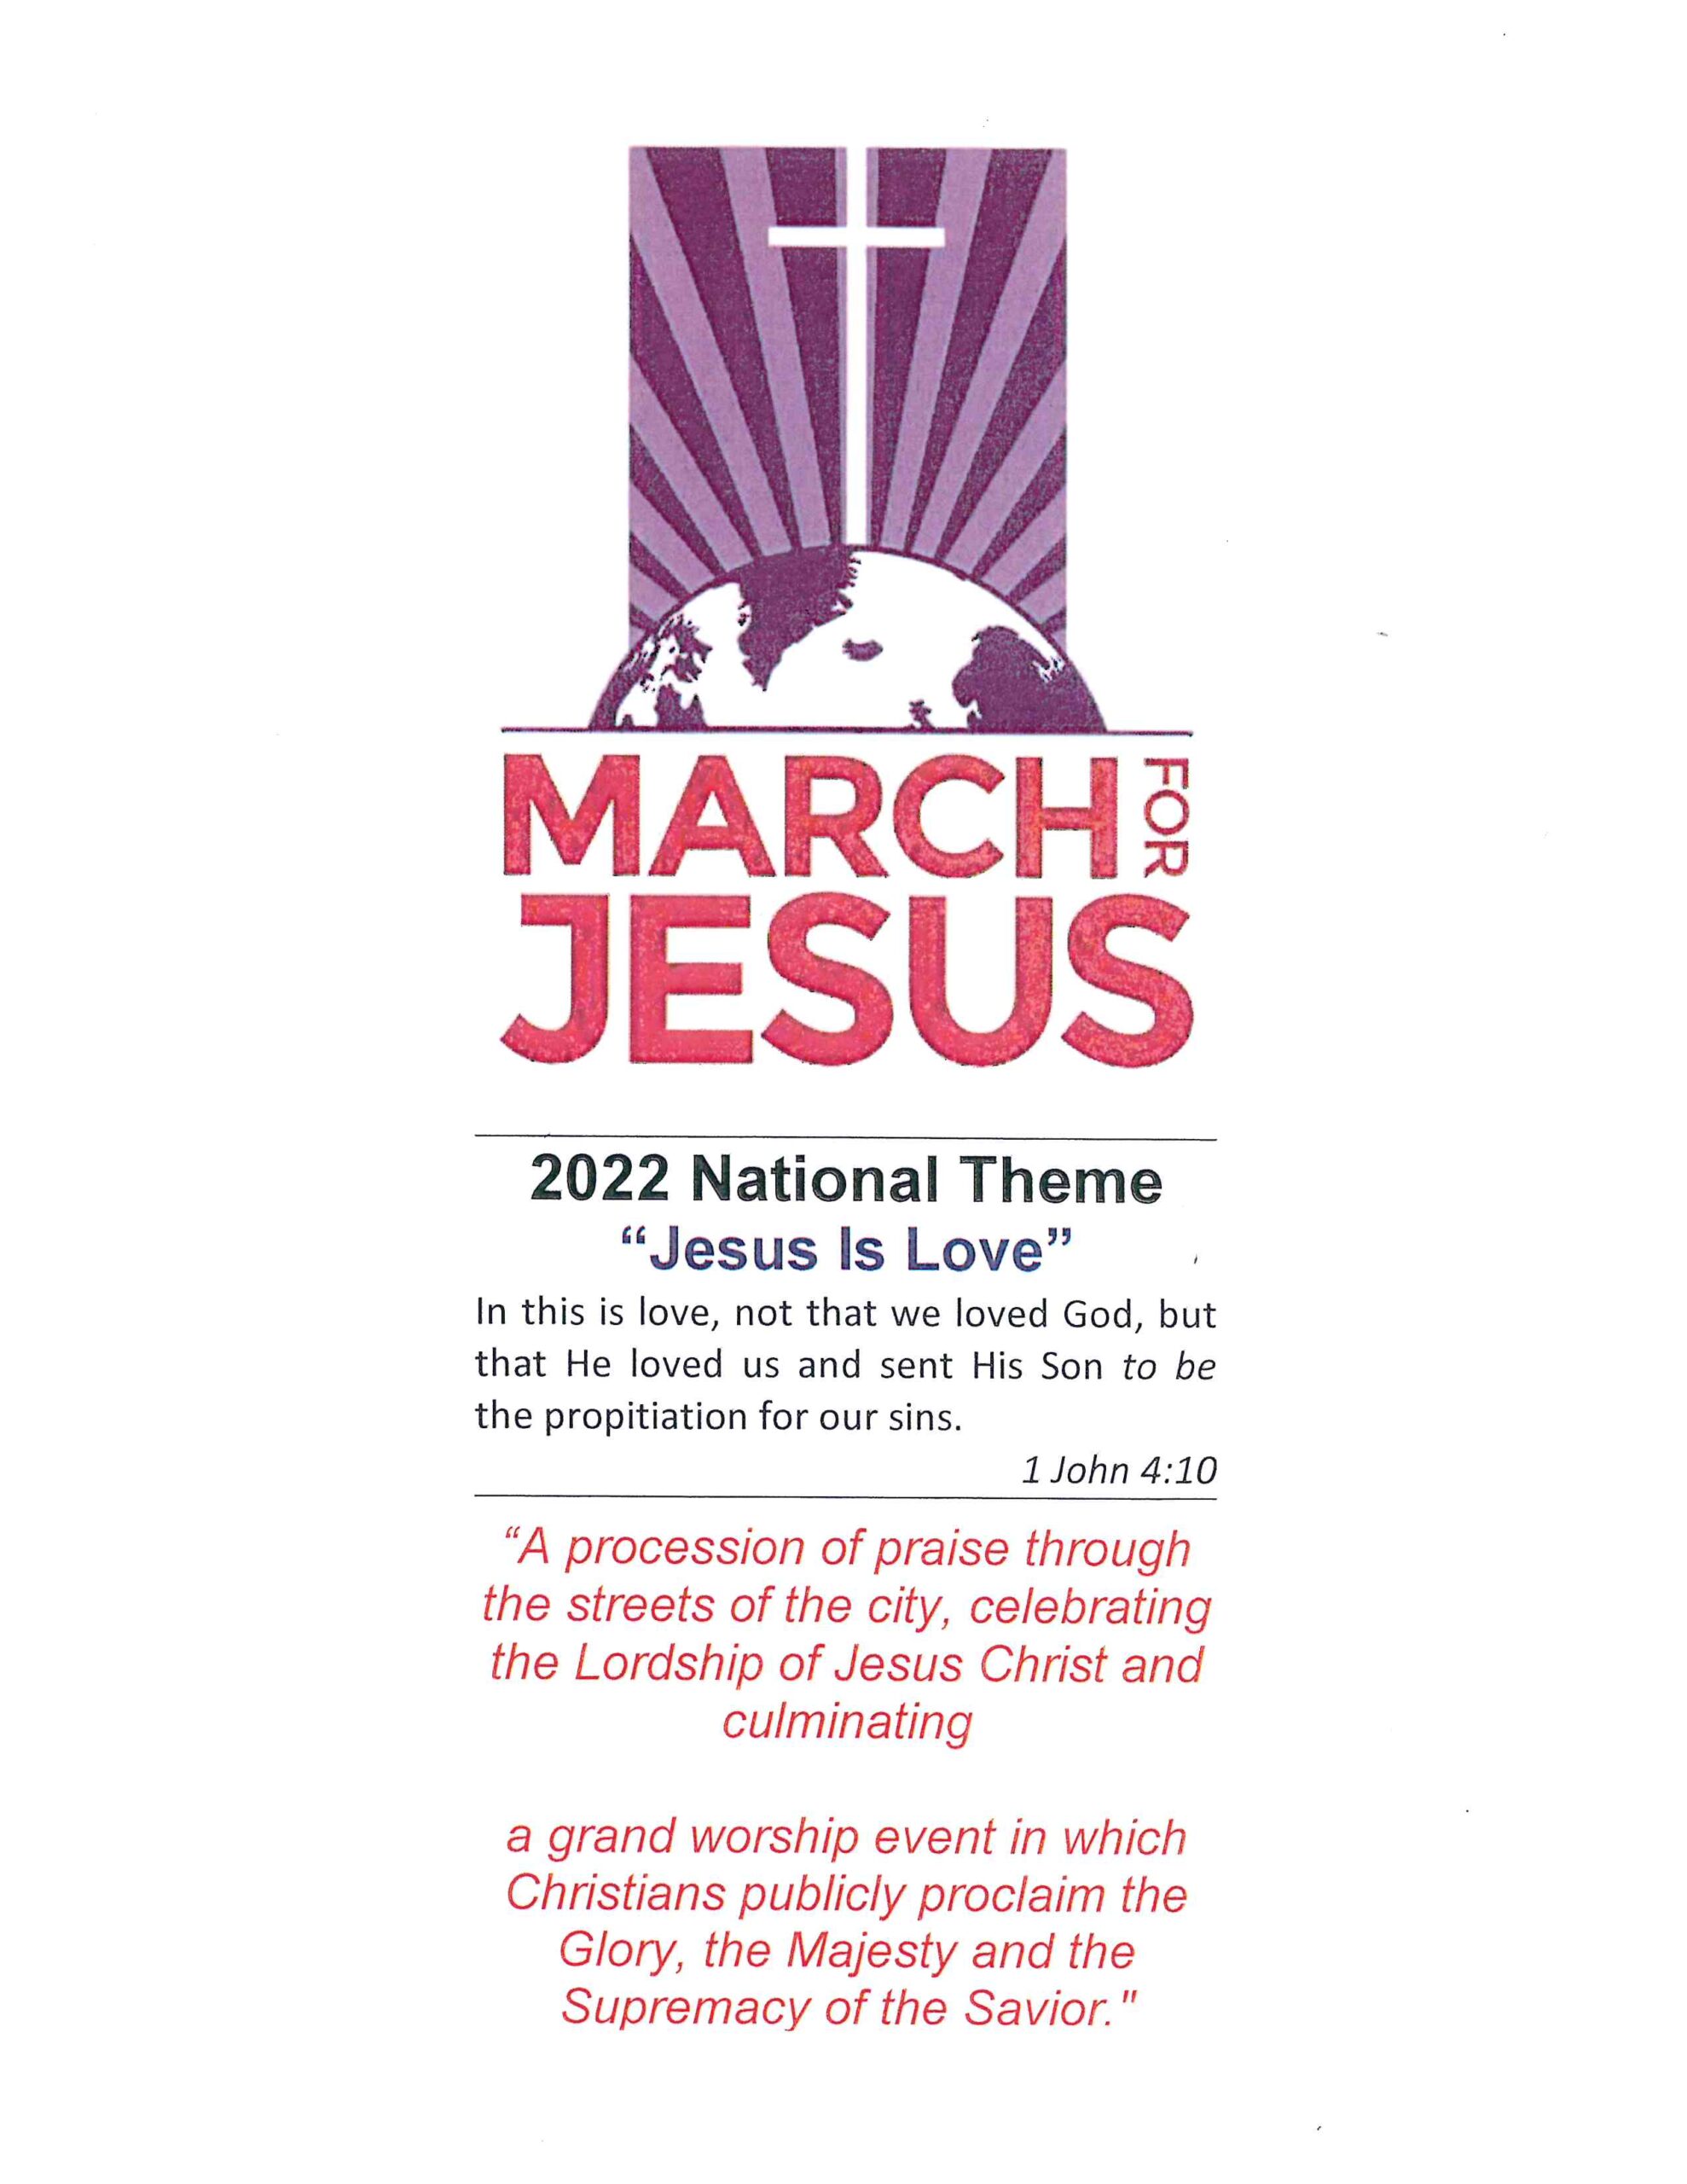 March for Jesus (1)